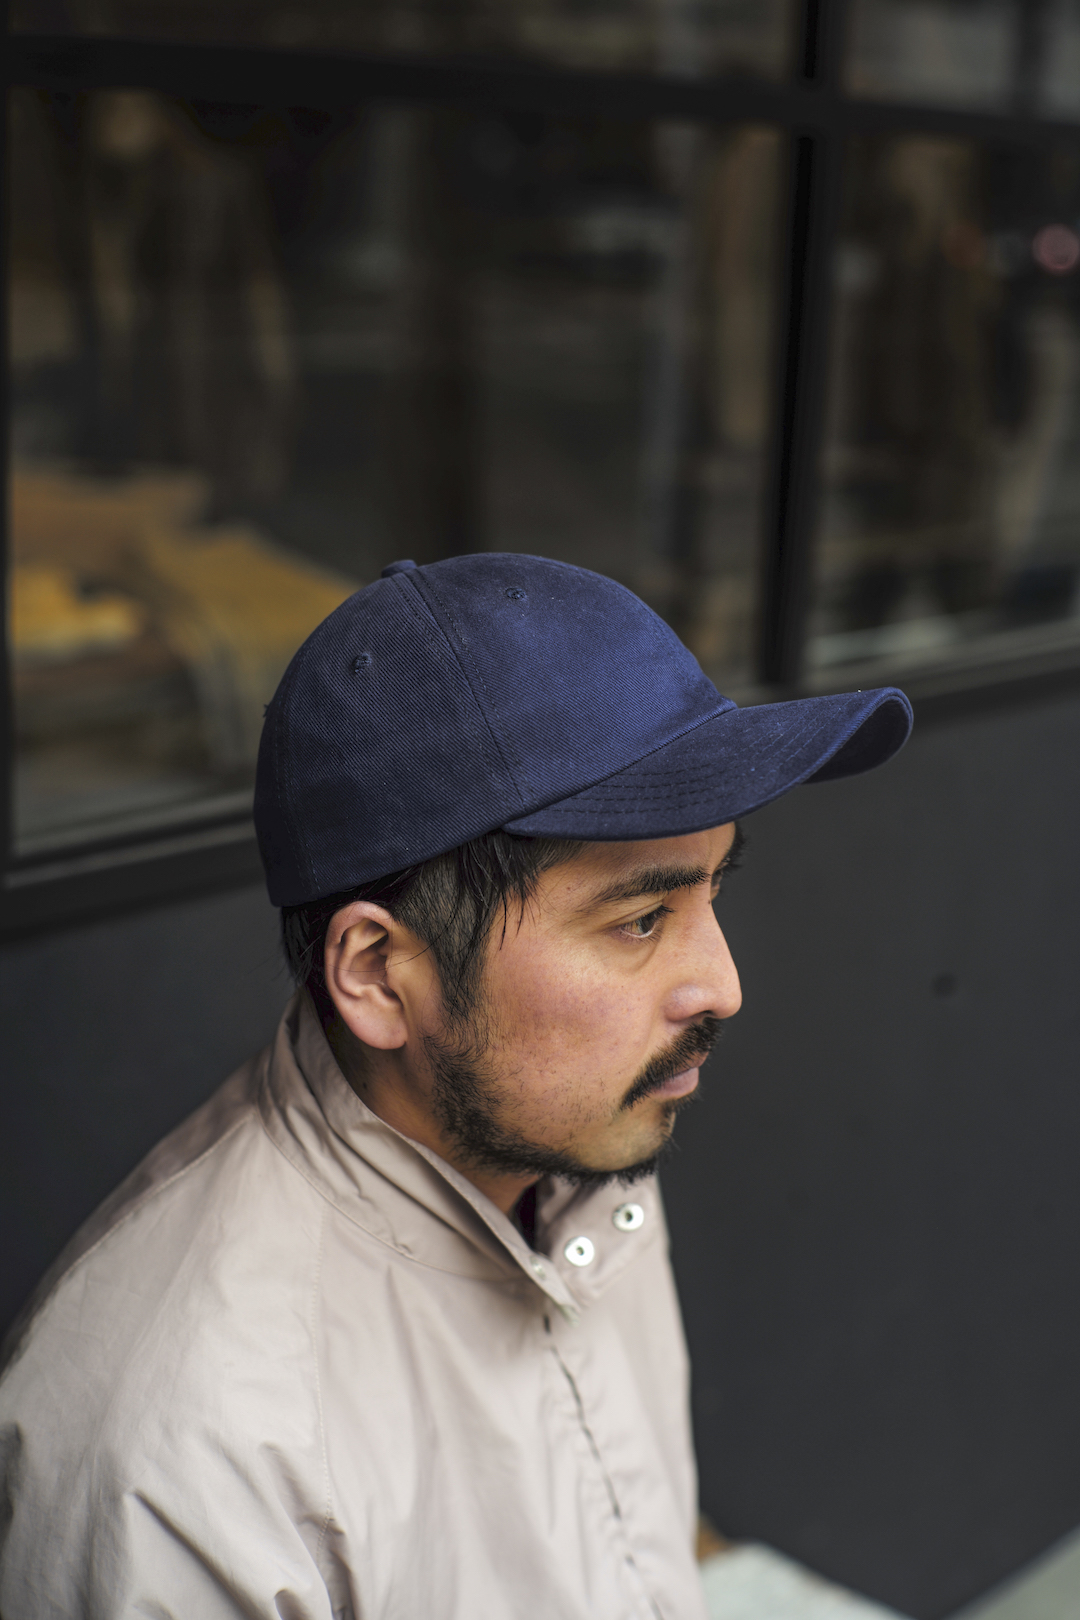 US NAVY BASEBALL CAP - MSG & SONS - ARCH ONLINE SHOP